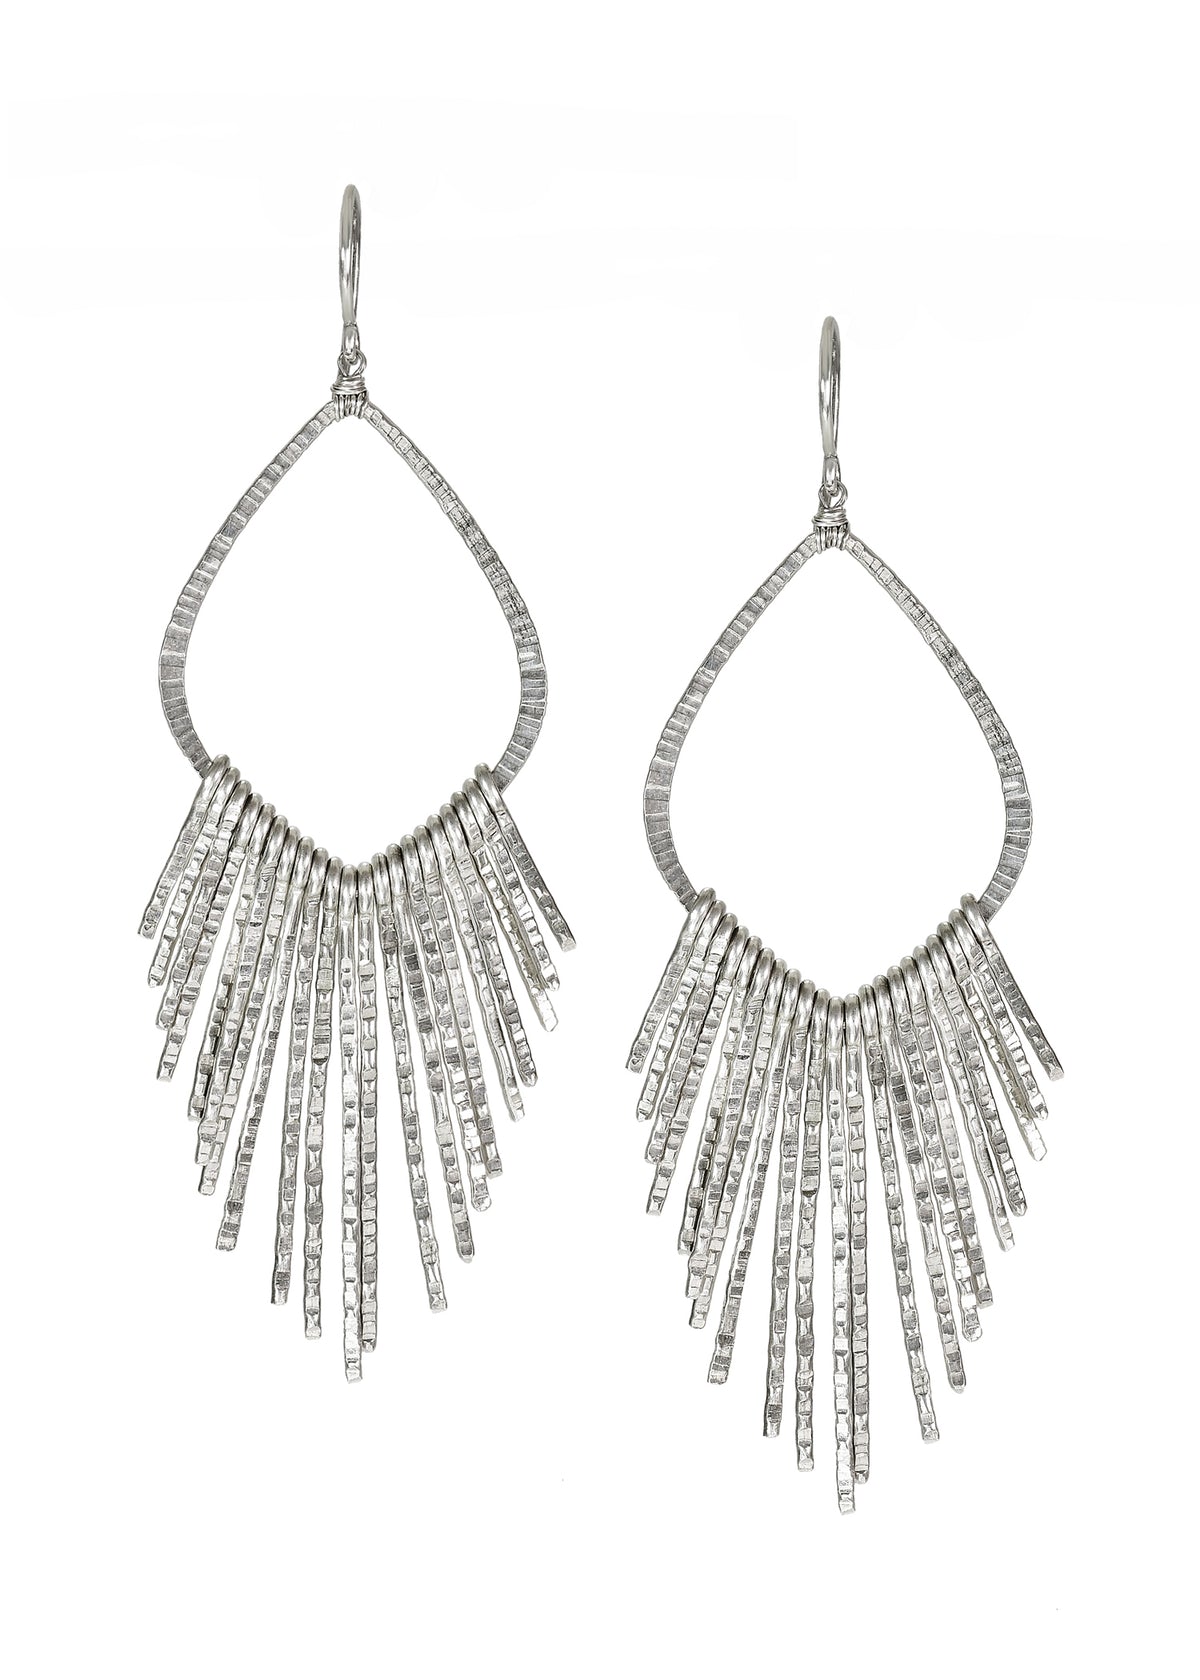 Sterling silver Earrings measure 2-7/8&quot; in length (including the ear wires), 7/8&quot; in width across the widest point of the frame and 1-1/8&quot; in width across the widest point of the spangles Handmade in our Los Angeles studio